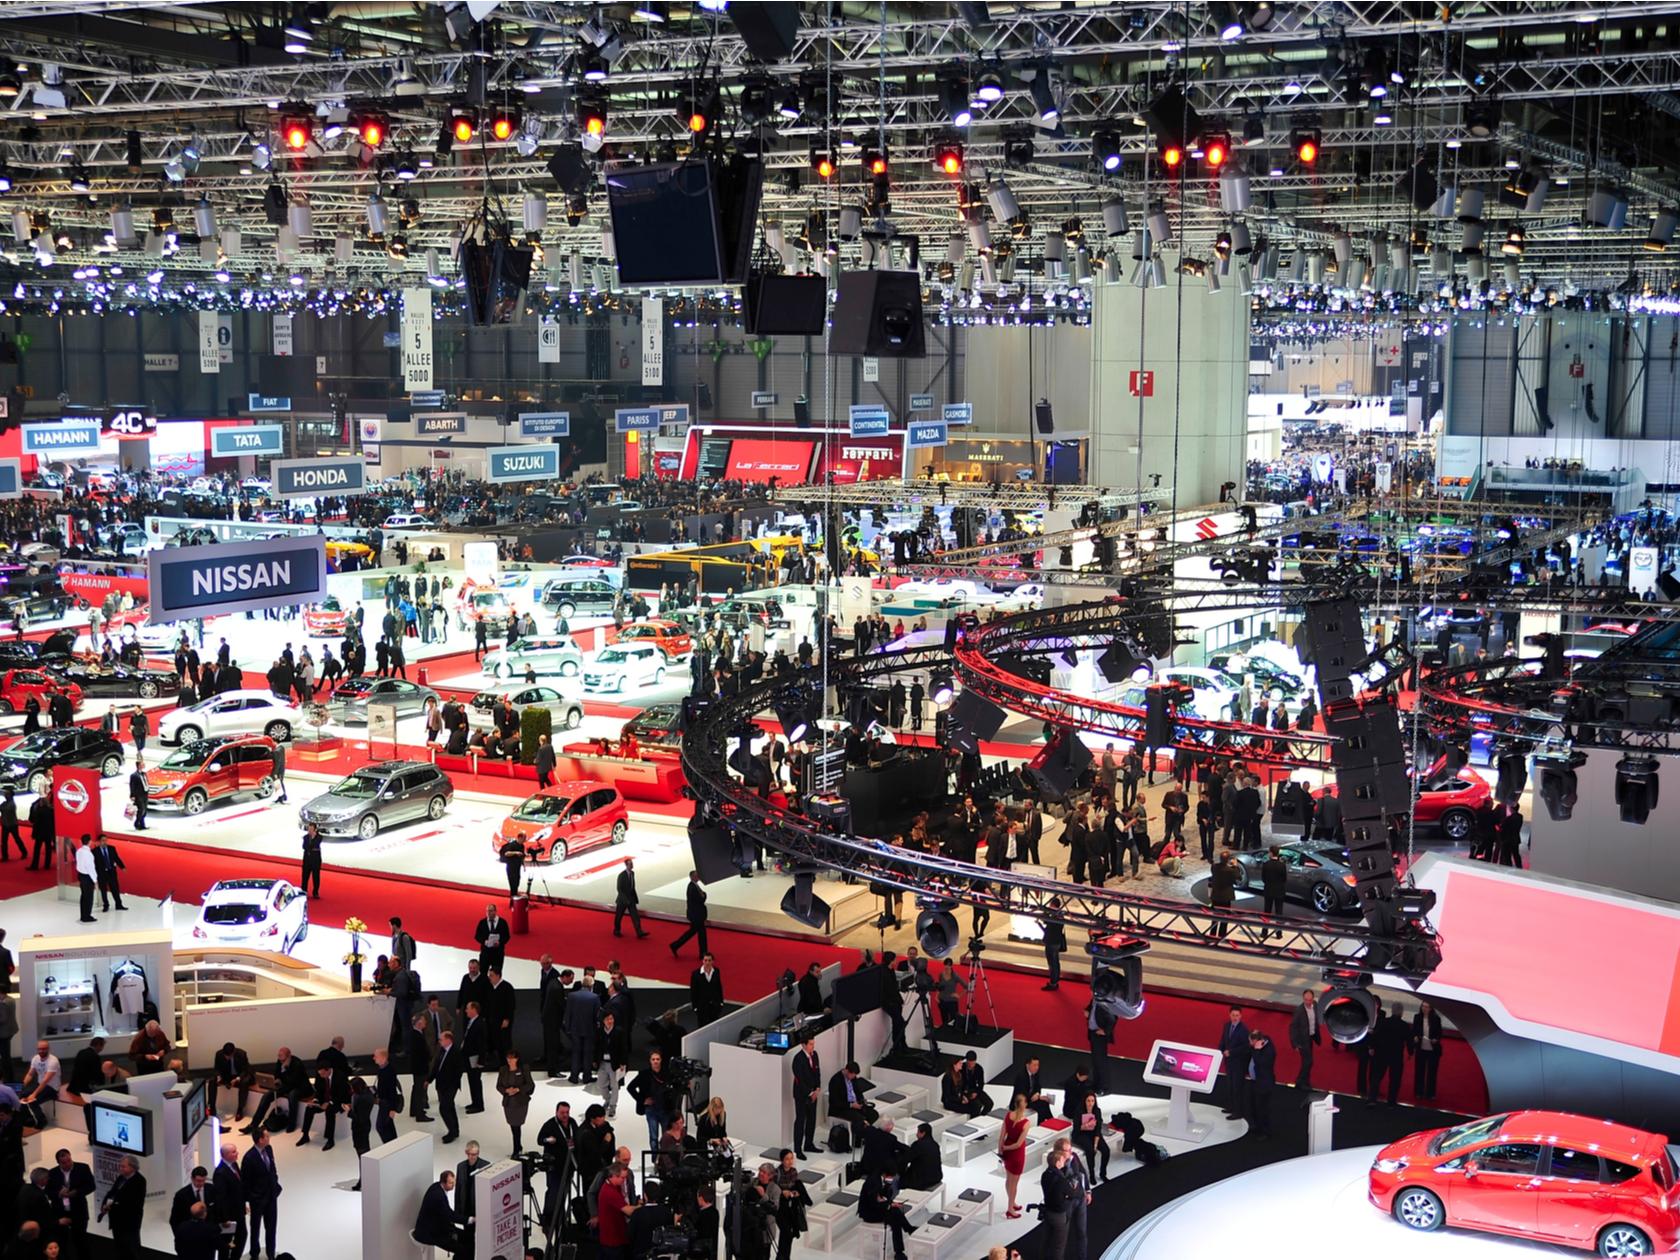 Attending an Auto Show? Here Are 6 Tips for a Successful Trip The